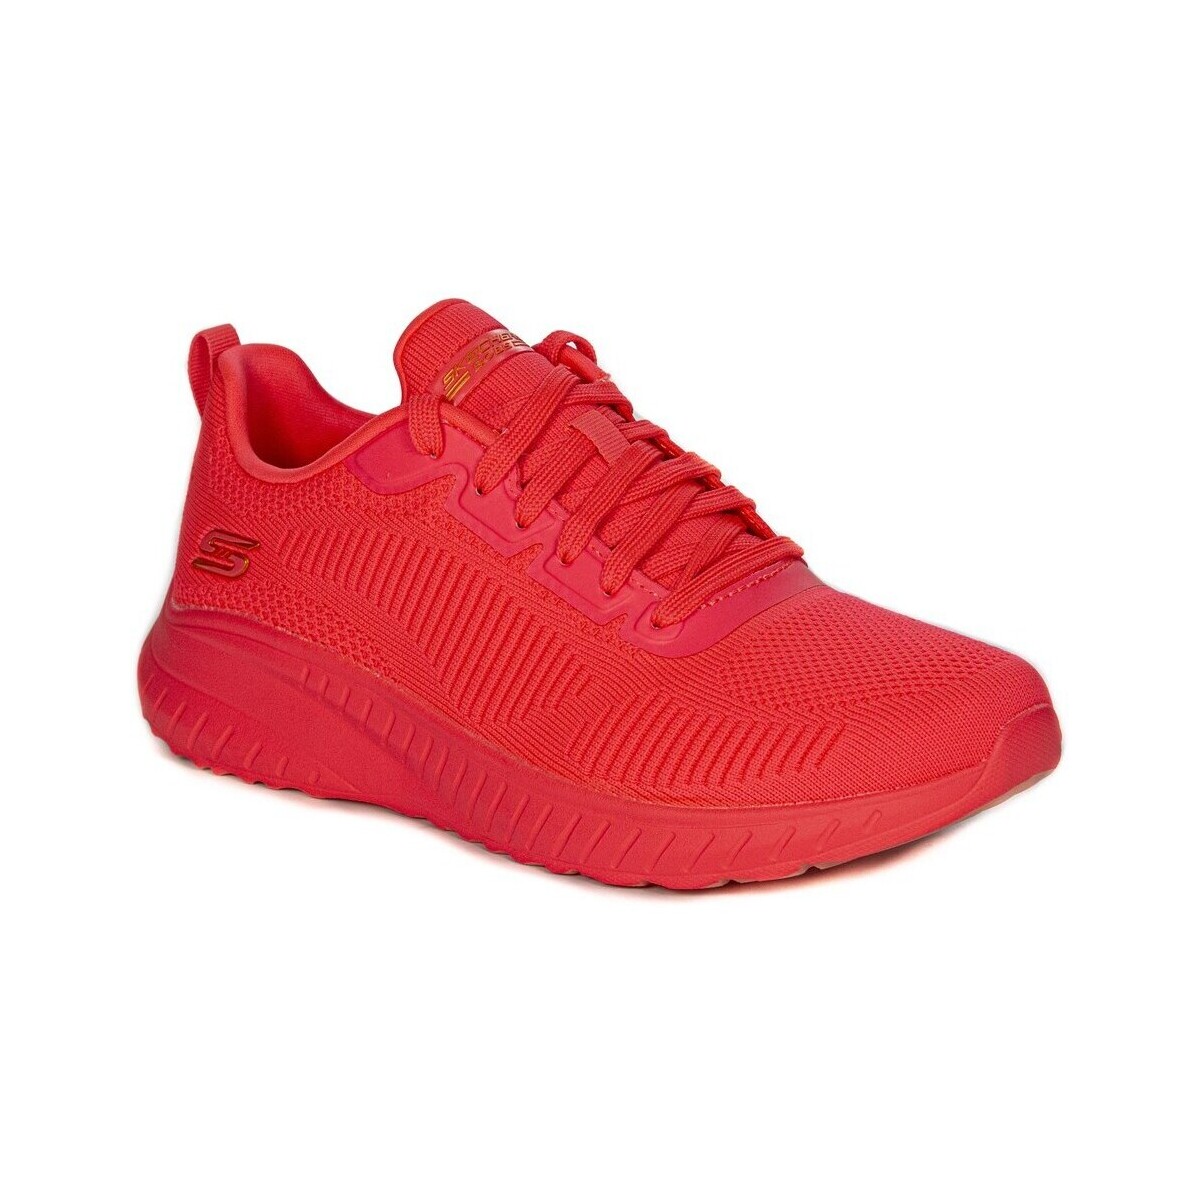 Skechers Bobs Neon Coral Red